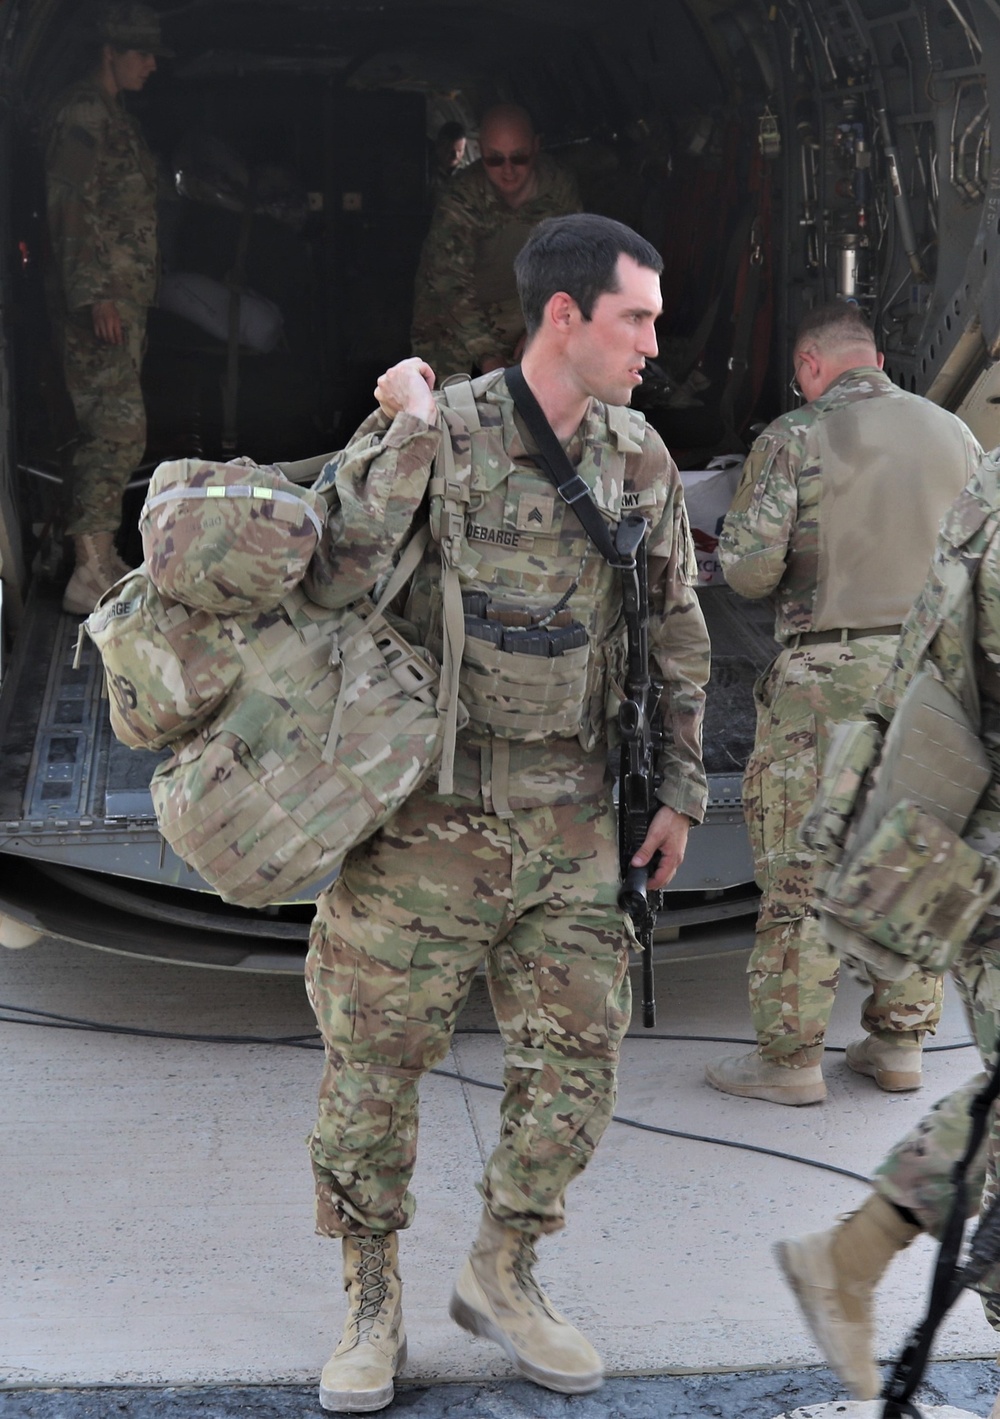 OTH Force completes mission, returns to home base